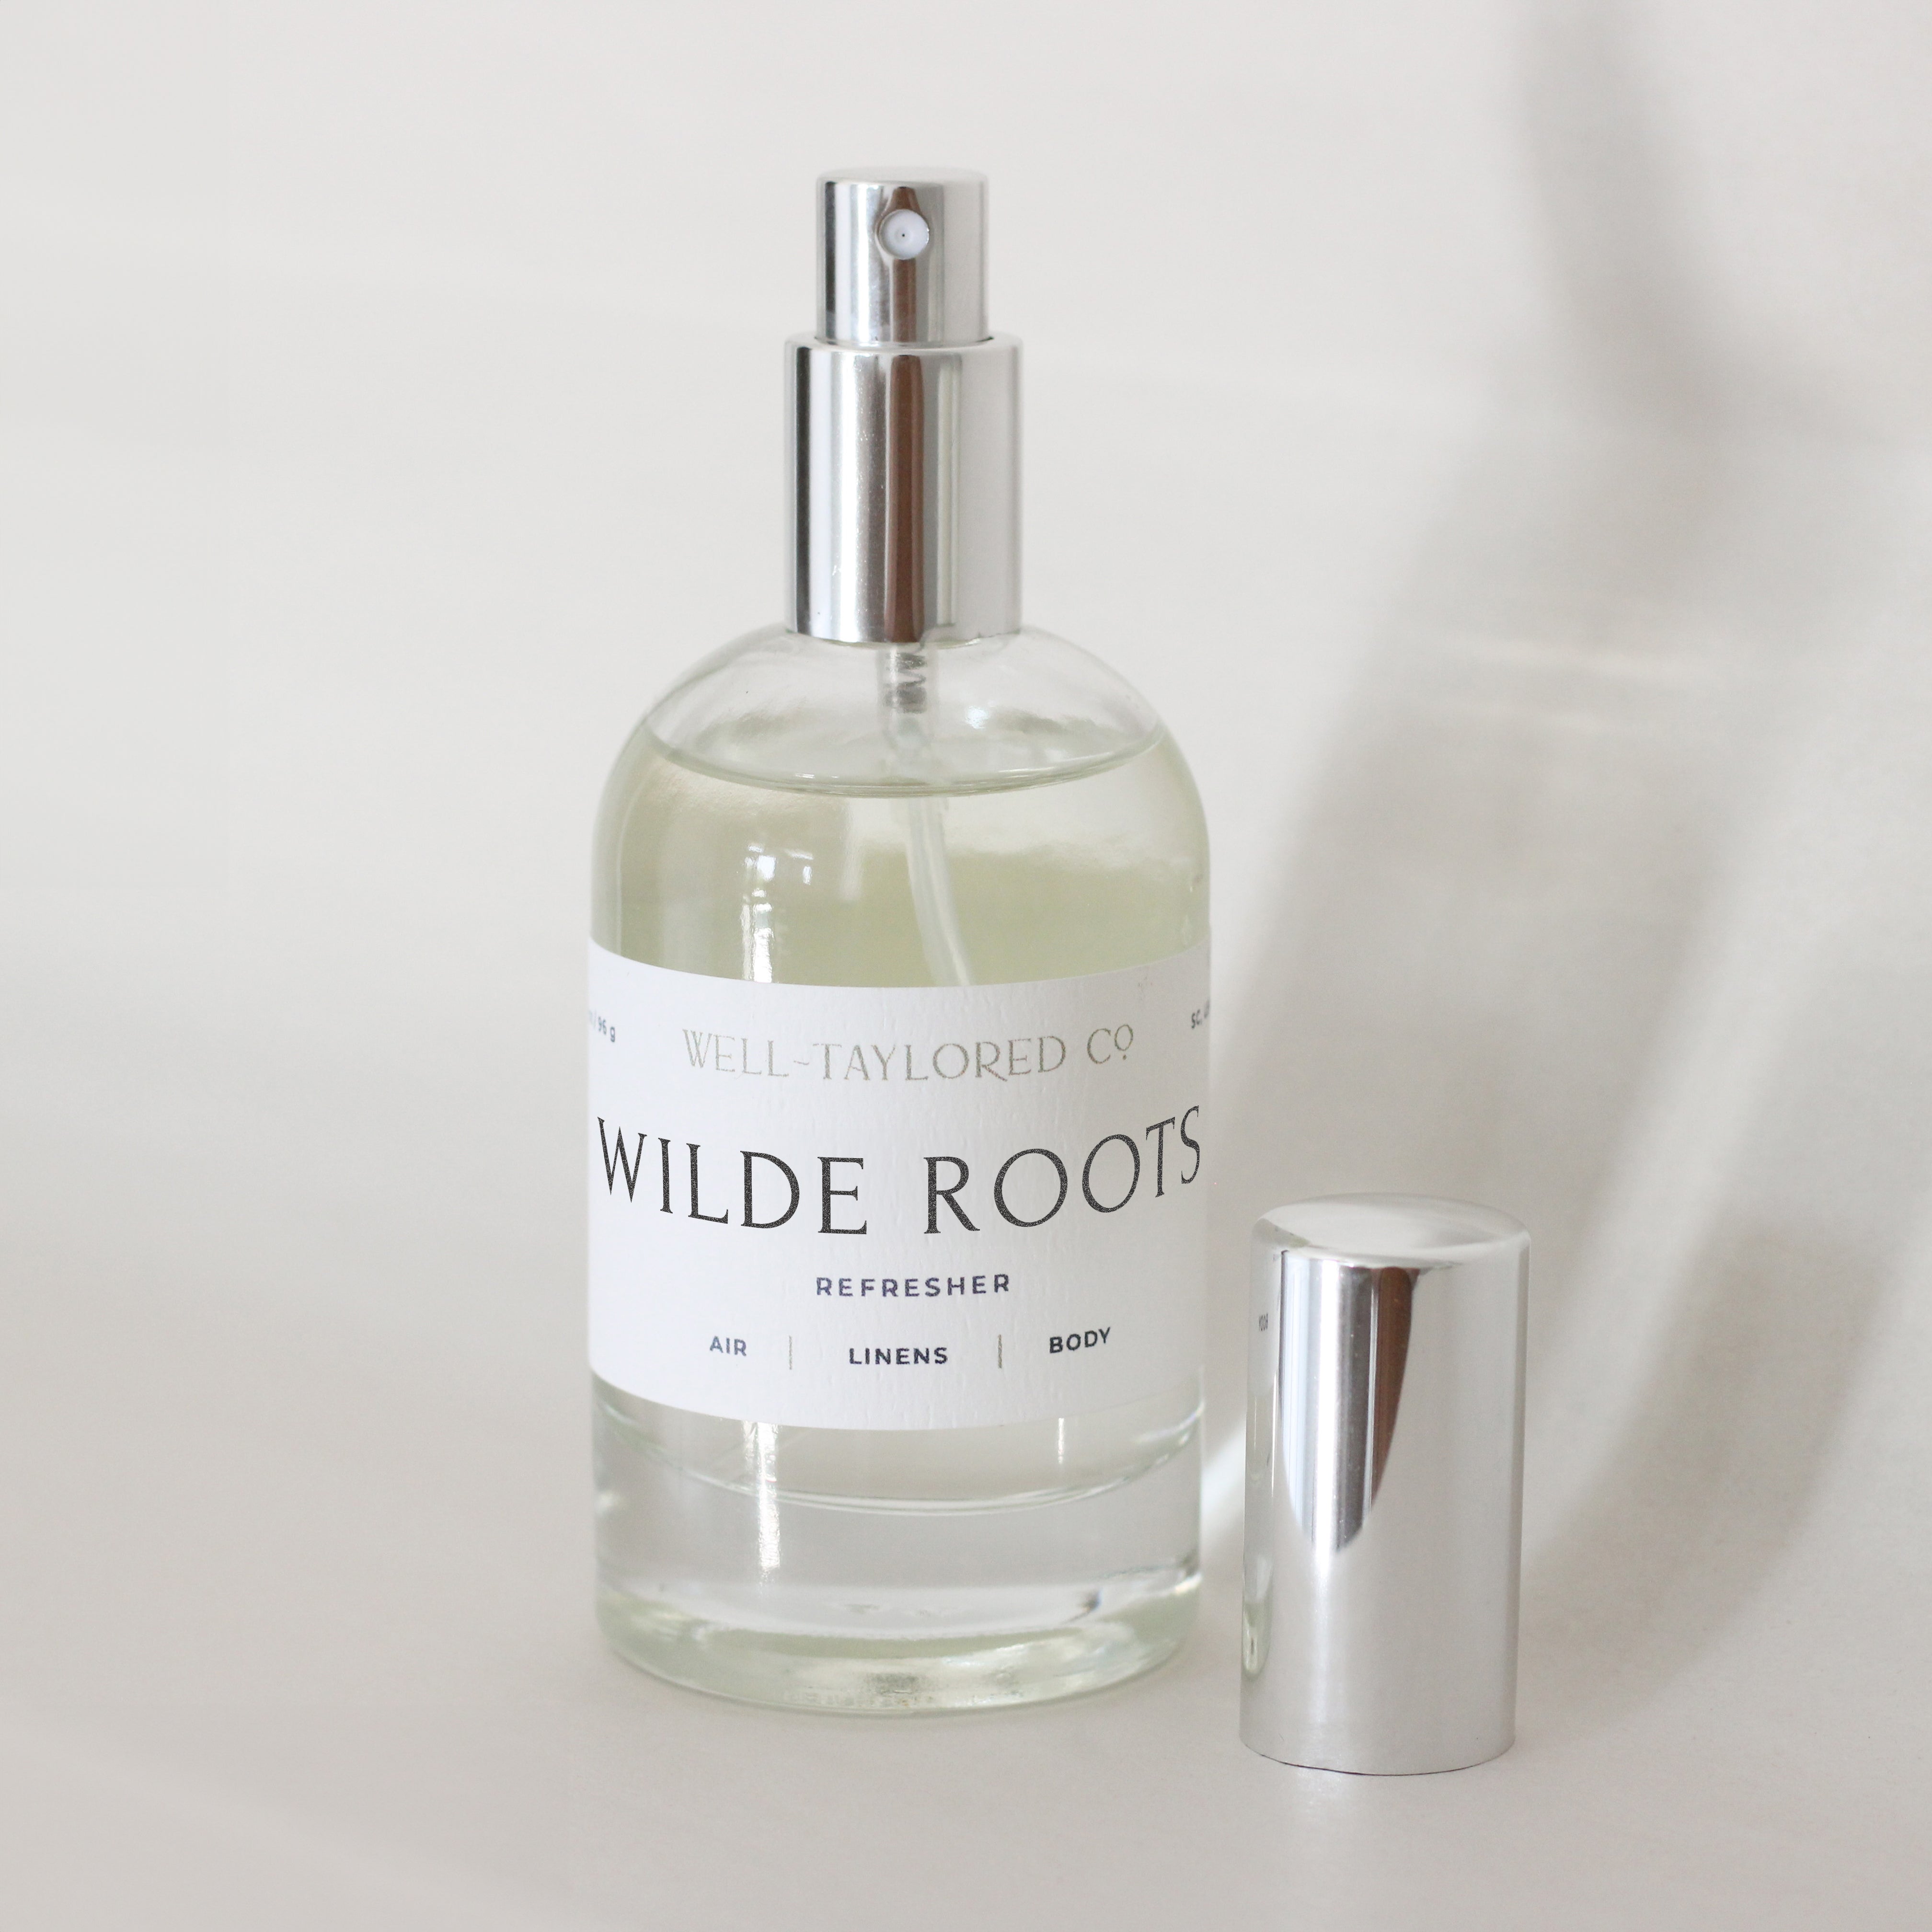 Wilde Roots Room & Linen Refresher Spray | Well-Taylored Co.